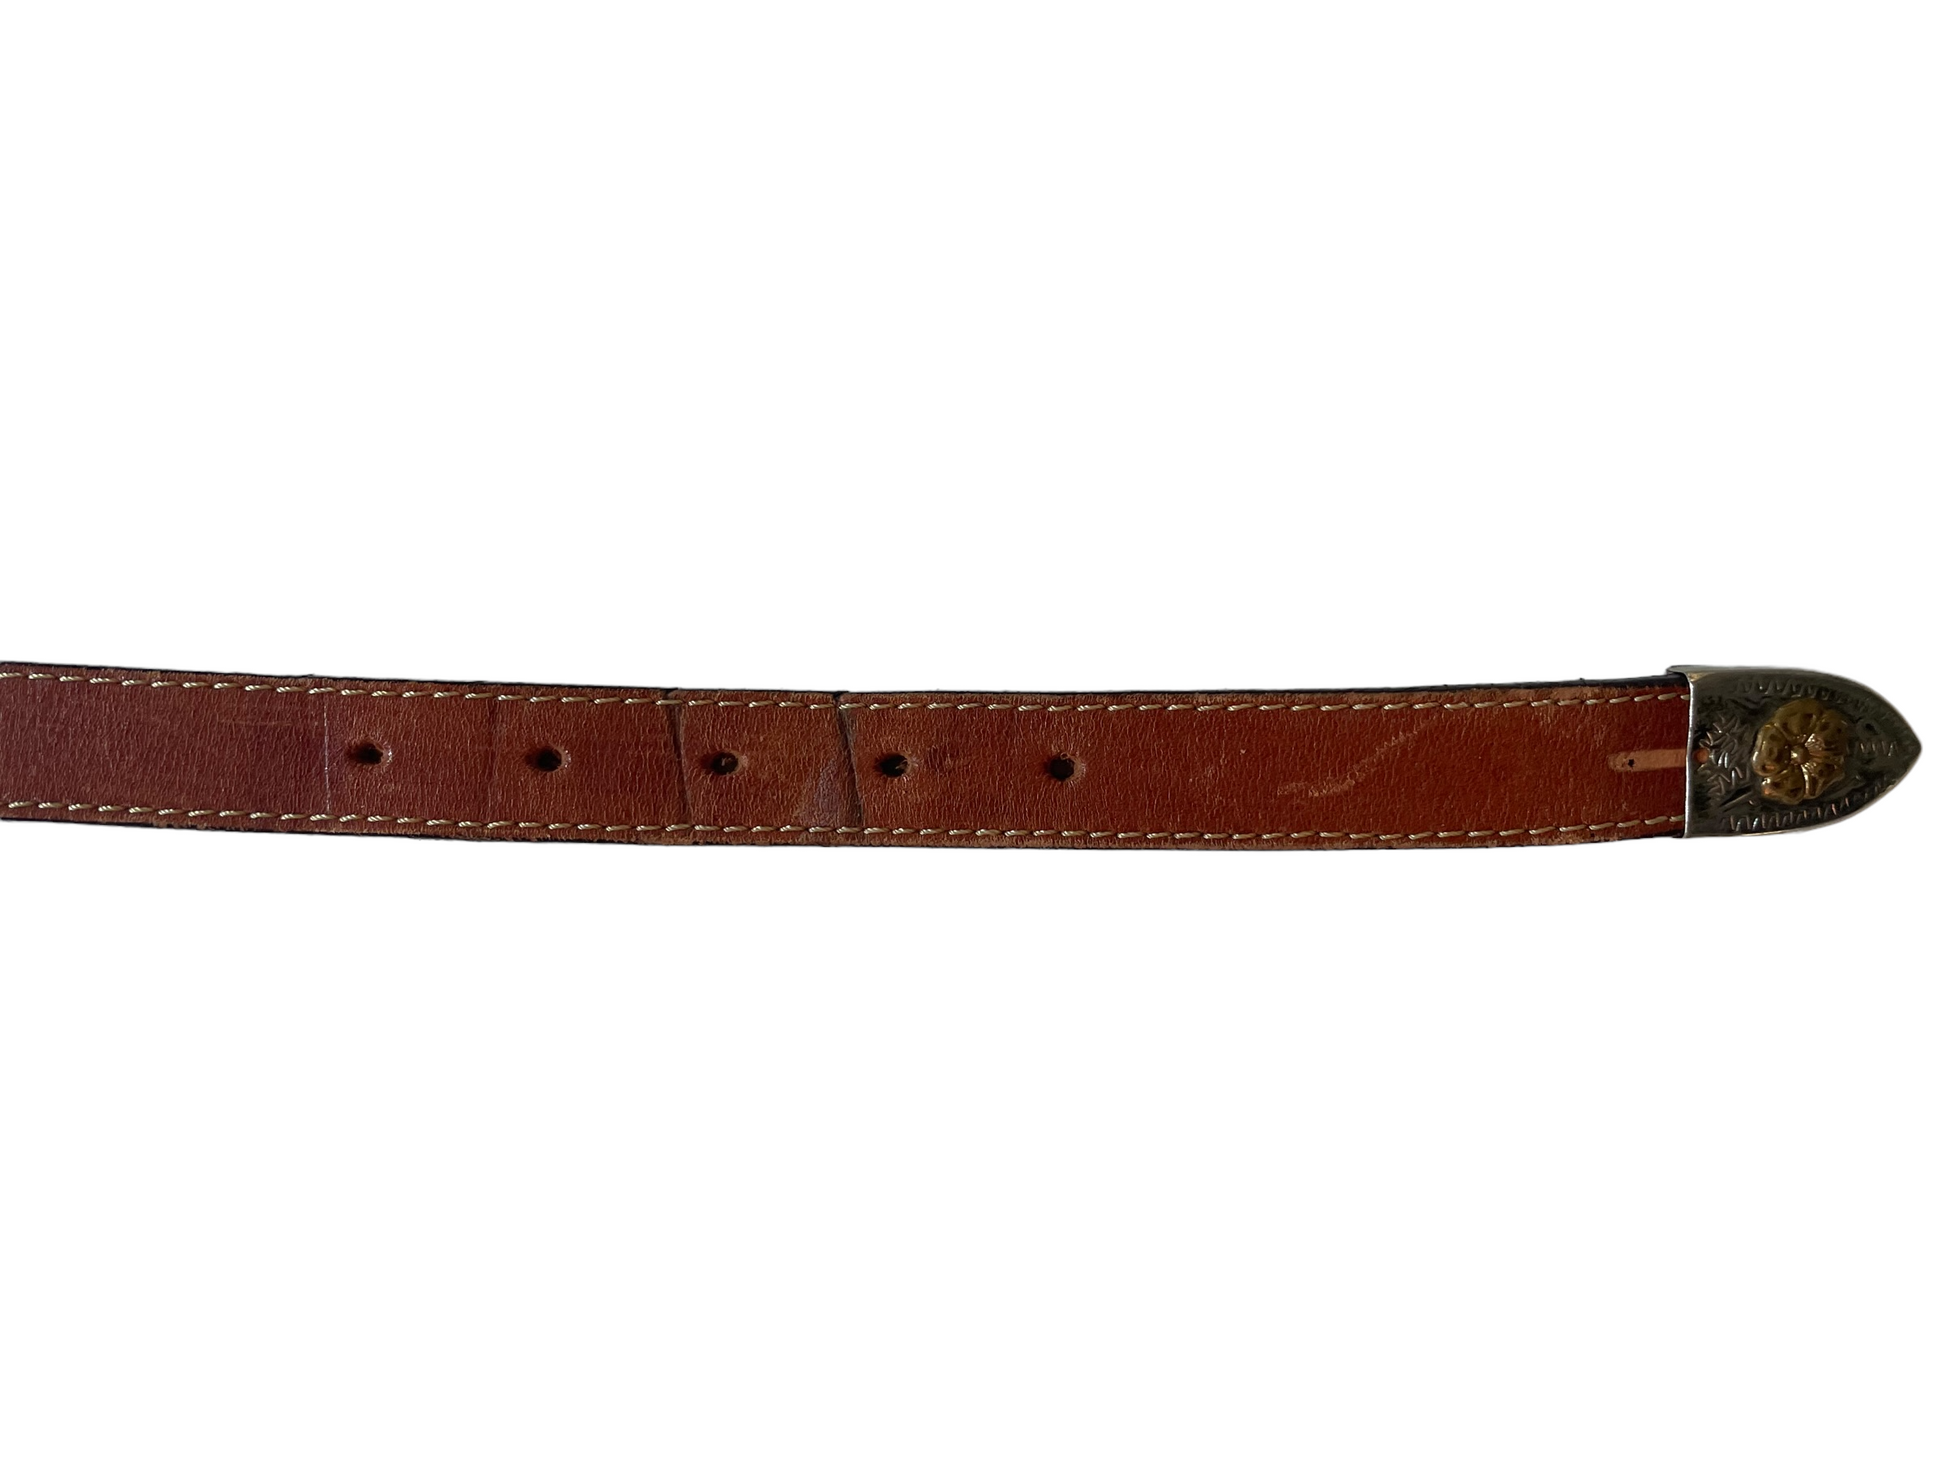 Vintage Leather Belt with Western Buckle view of belt with tip.